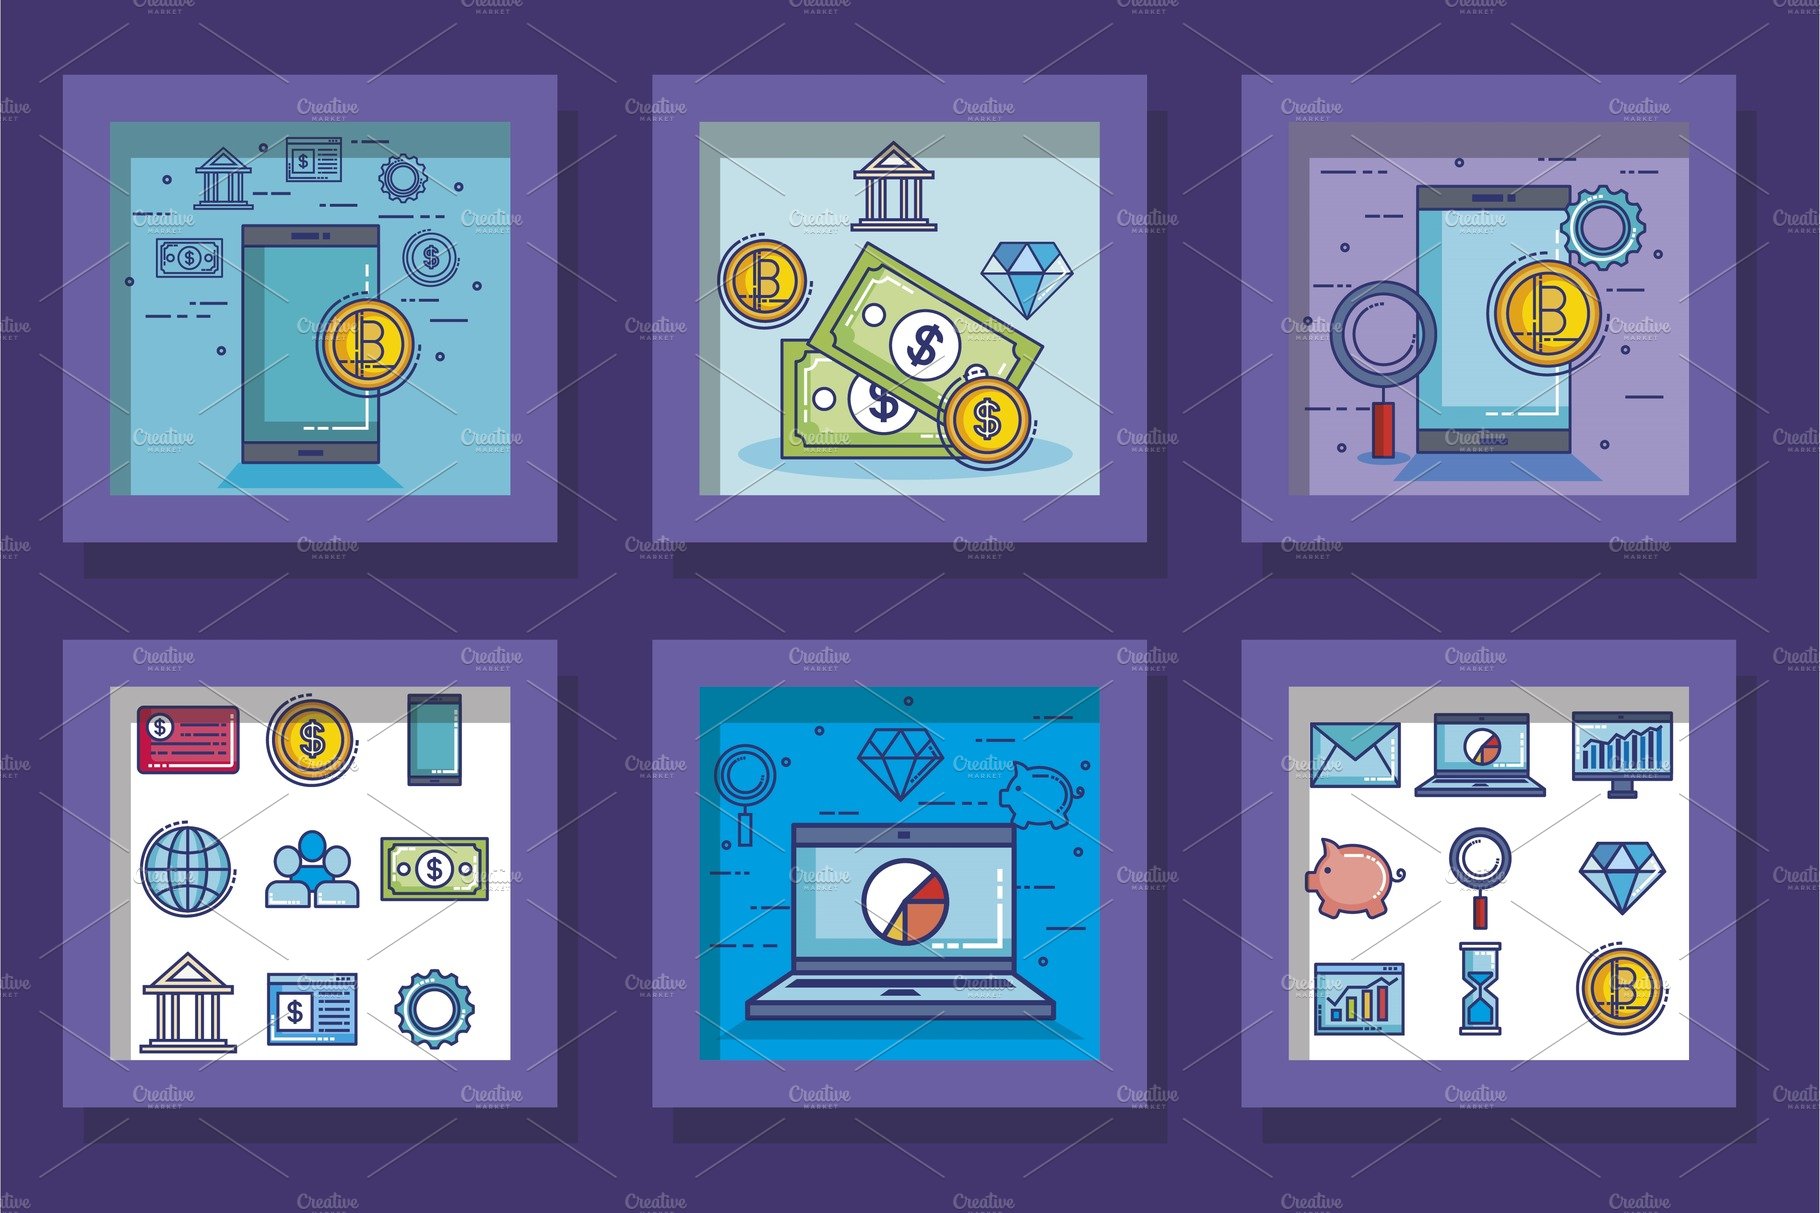 A set of four flat icons depicting different types of money.